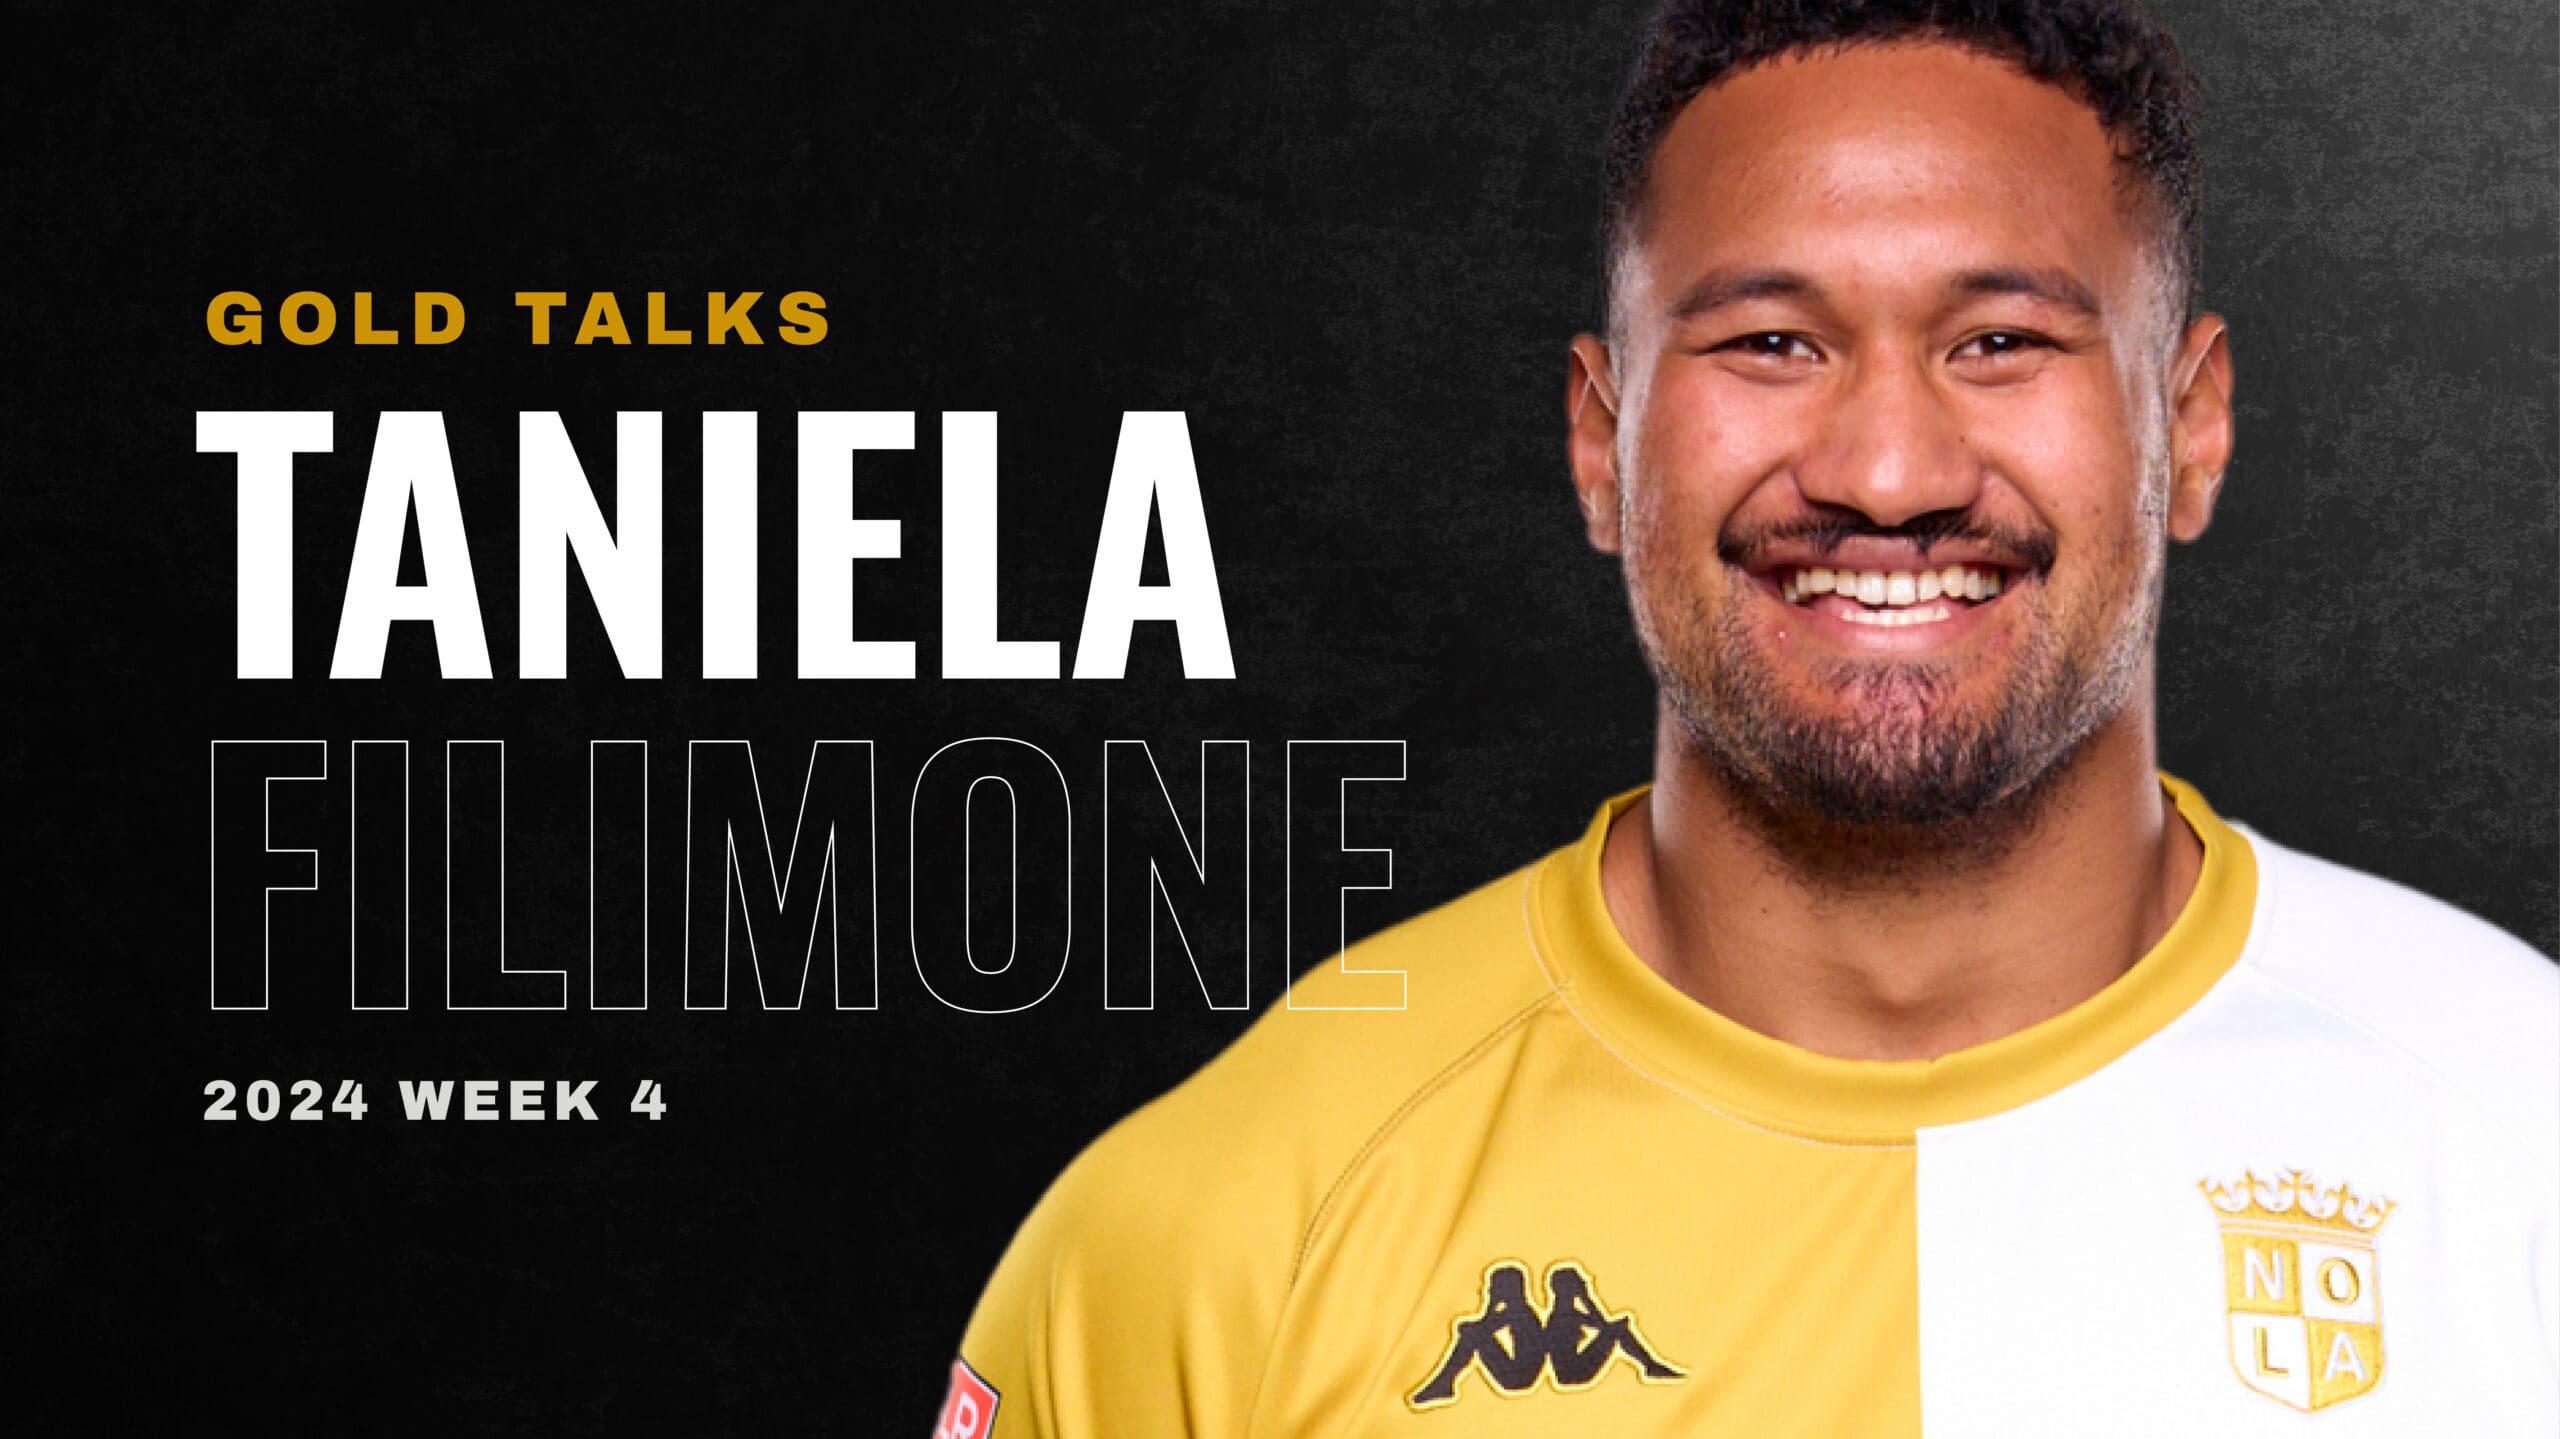 GOLD Talks: Taniela Filimone’s Reflections on Rugby, Resilience, and the Road Ahead